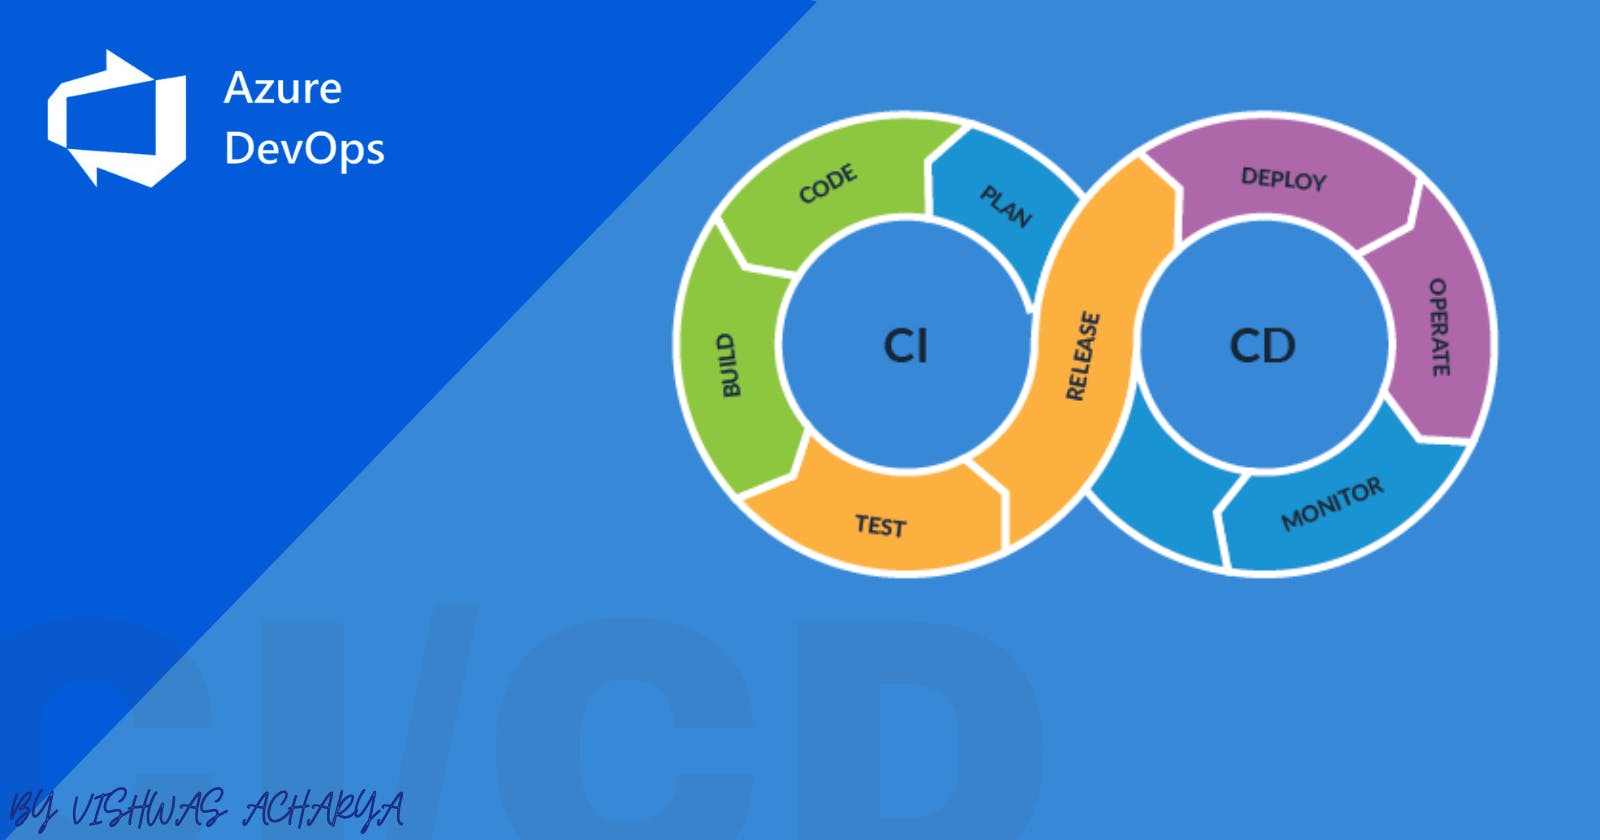 How to Set Up a CI/CD Pipeline in Azure DevOps: A Step-by-Step Guide